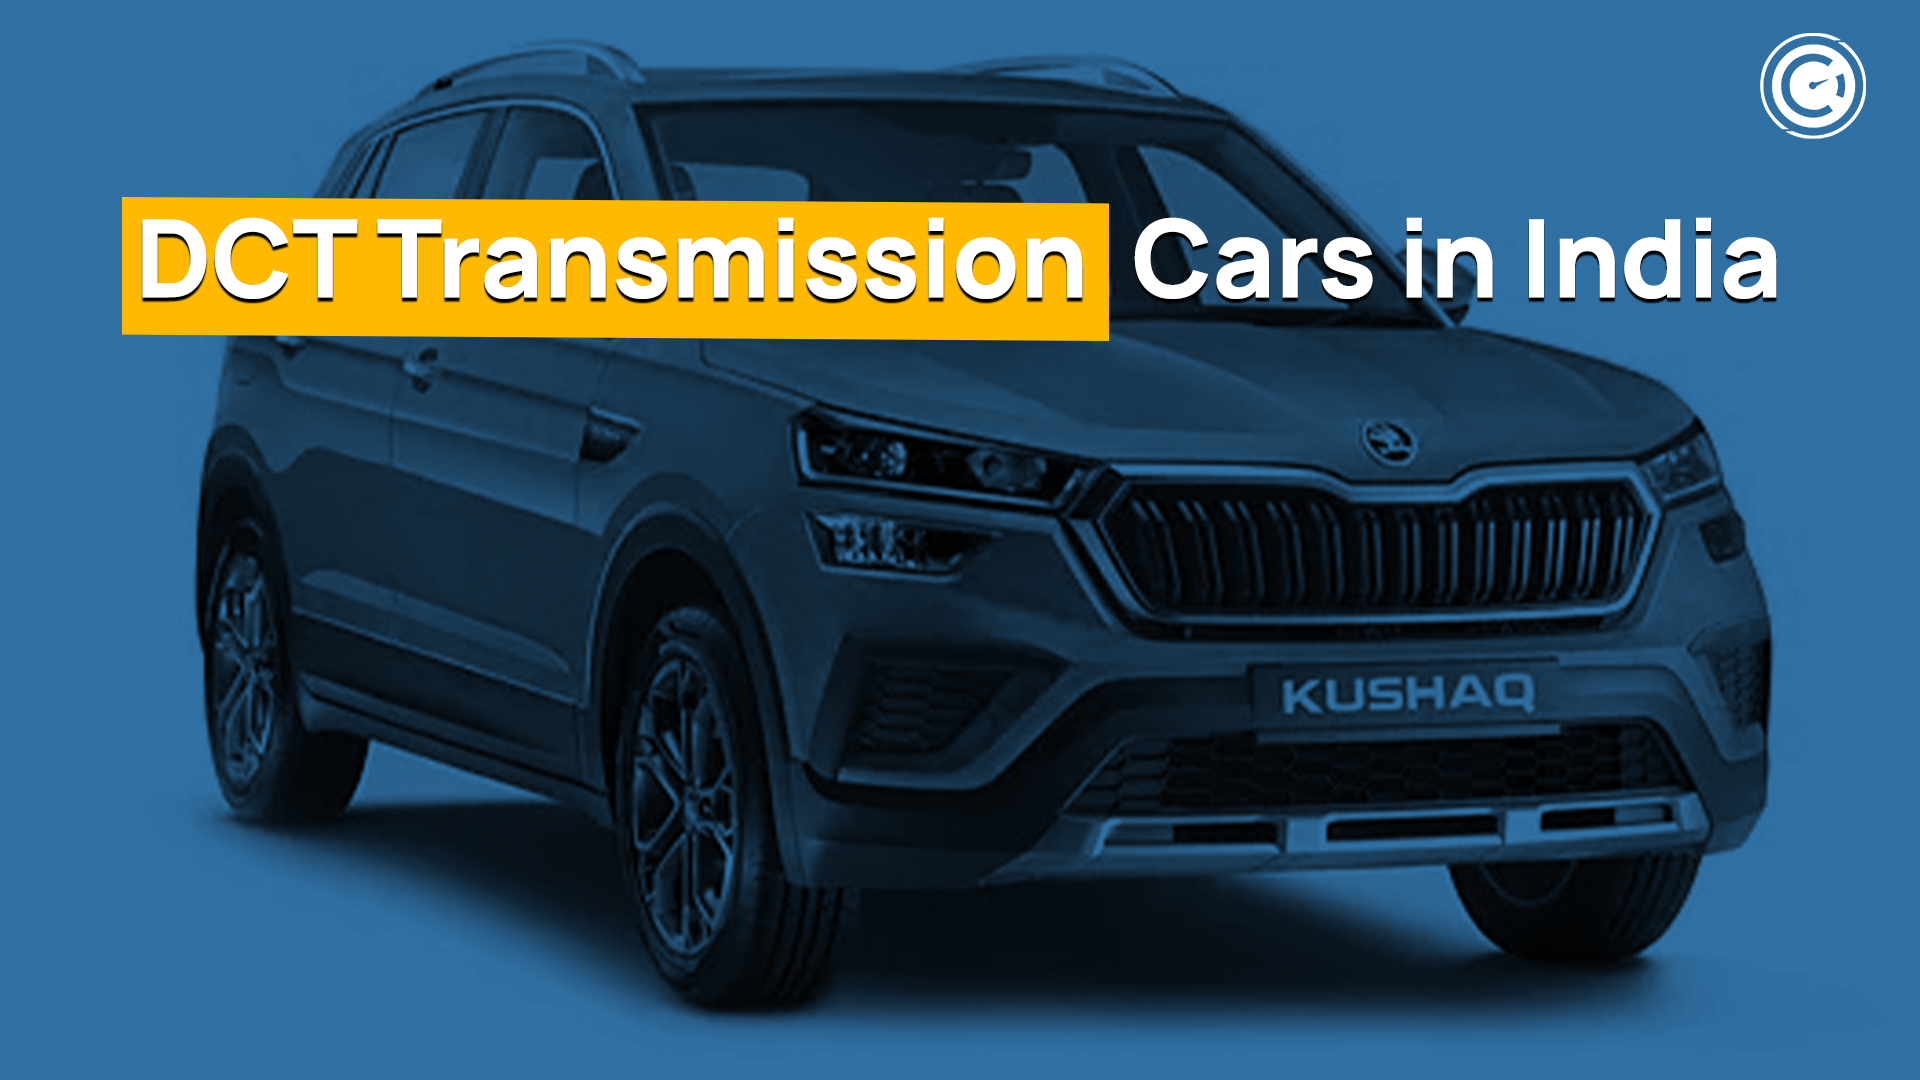 DCT transmission cars in India